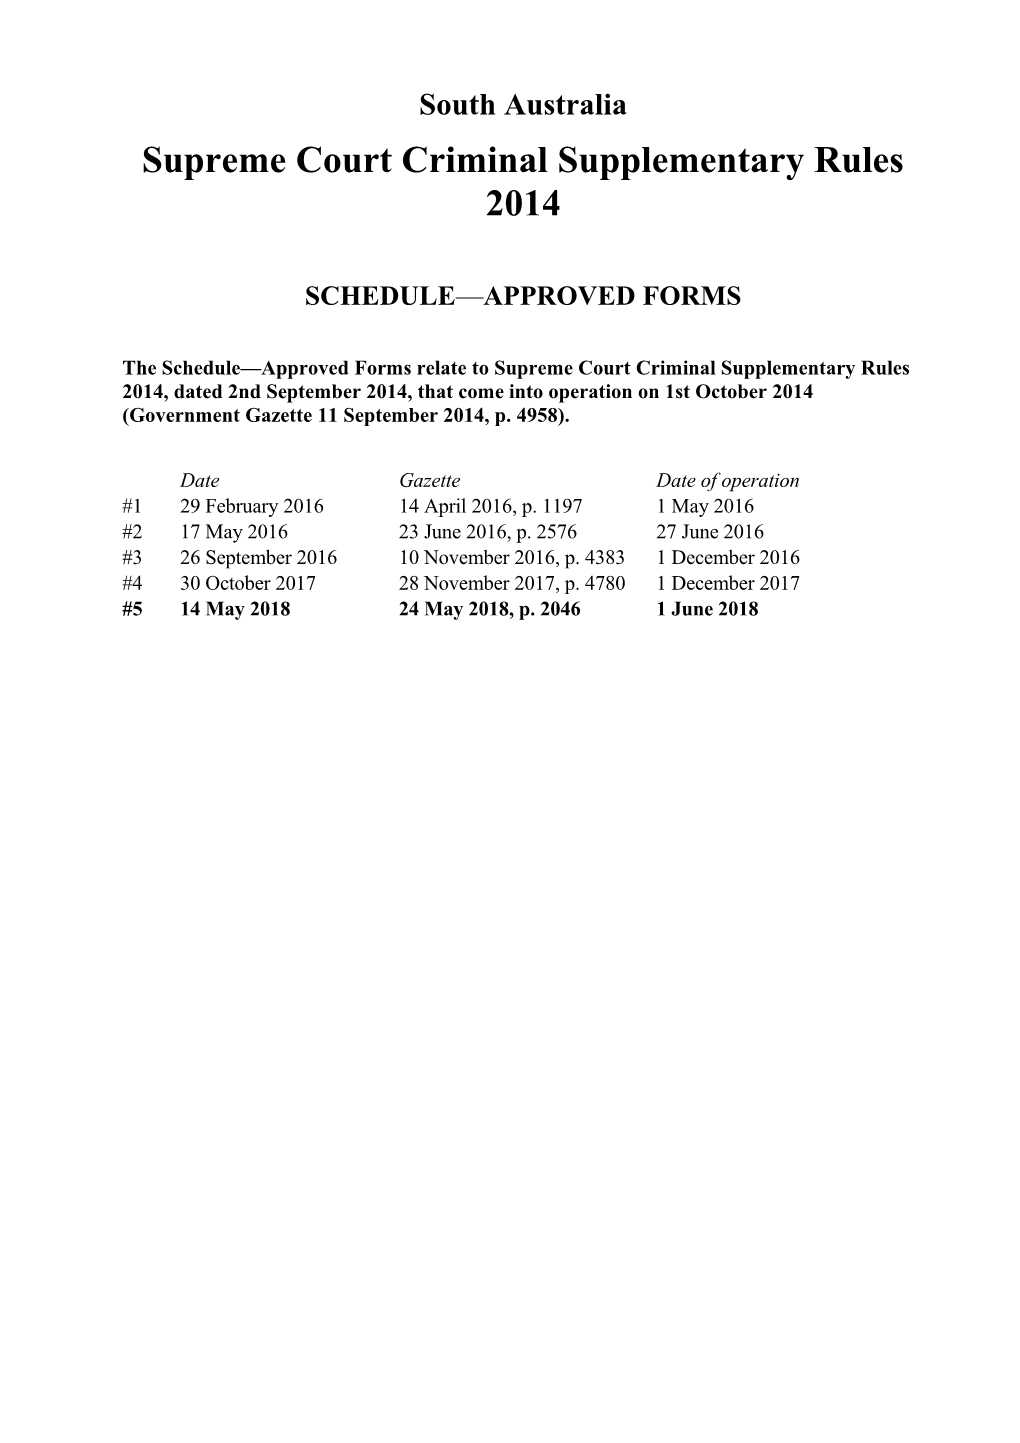 Supreme Court Criminal Supplementary Rules 2014 - Schedule - Approved Forms